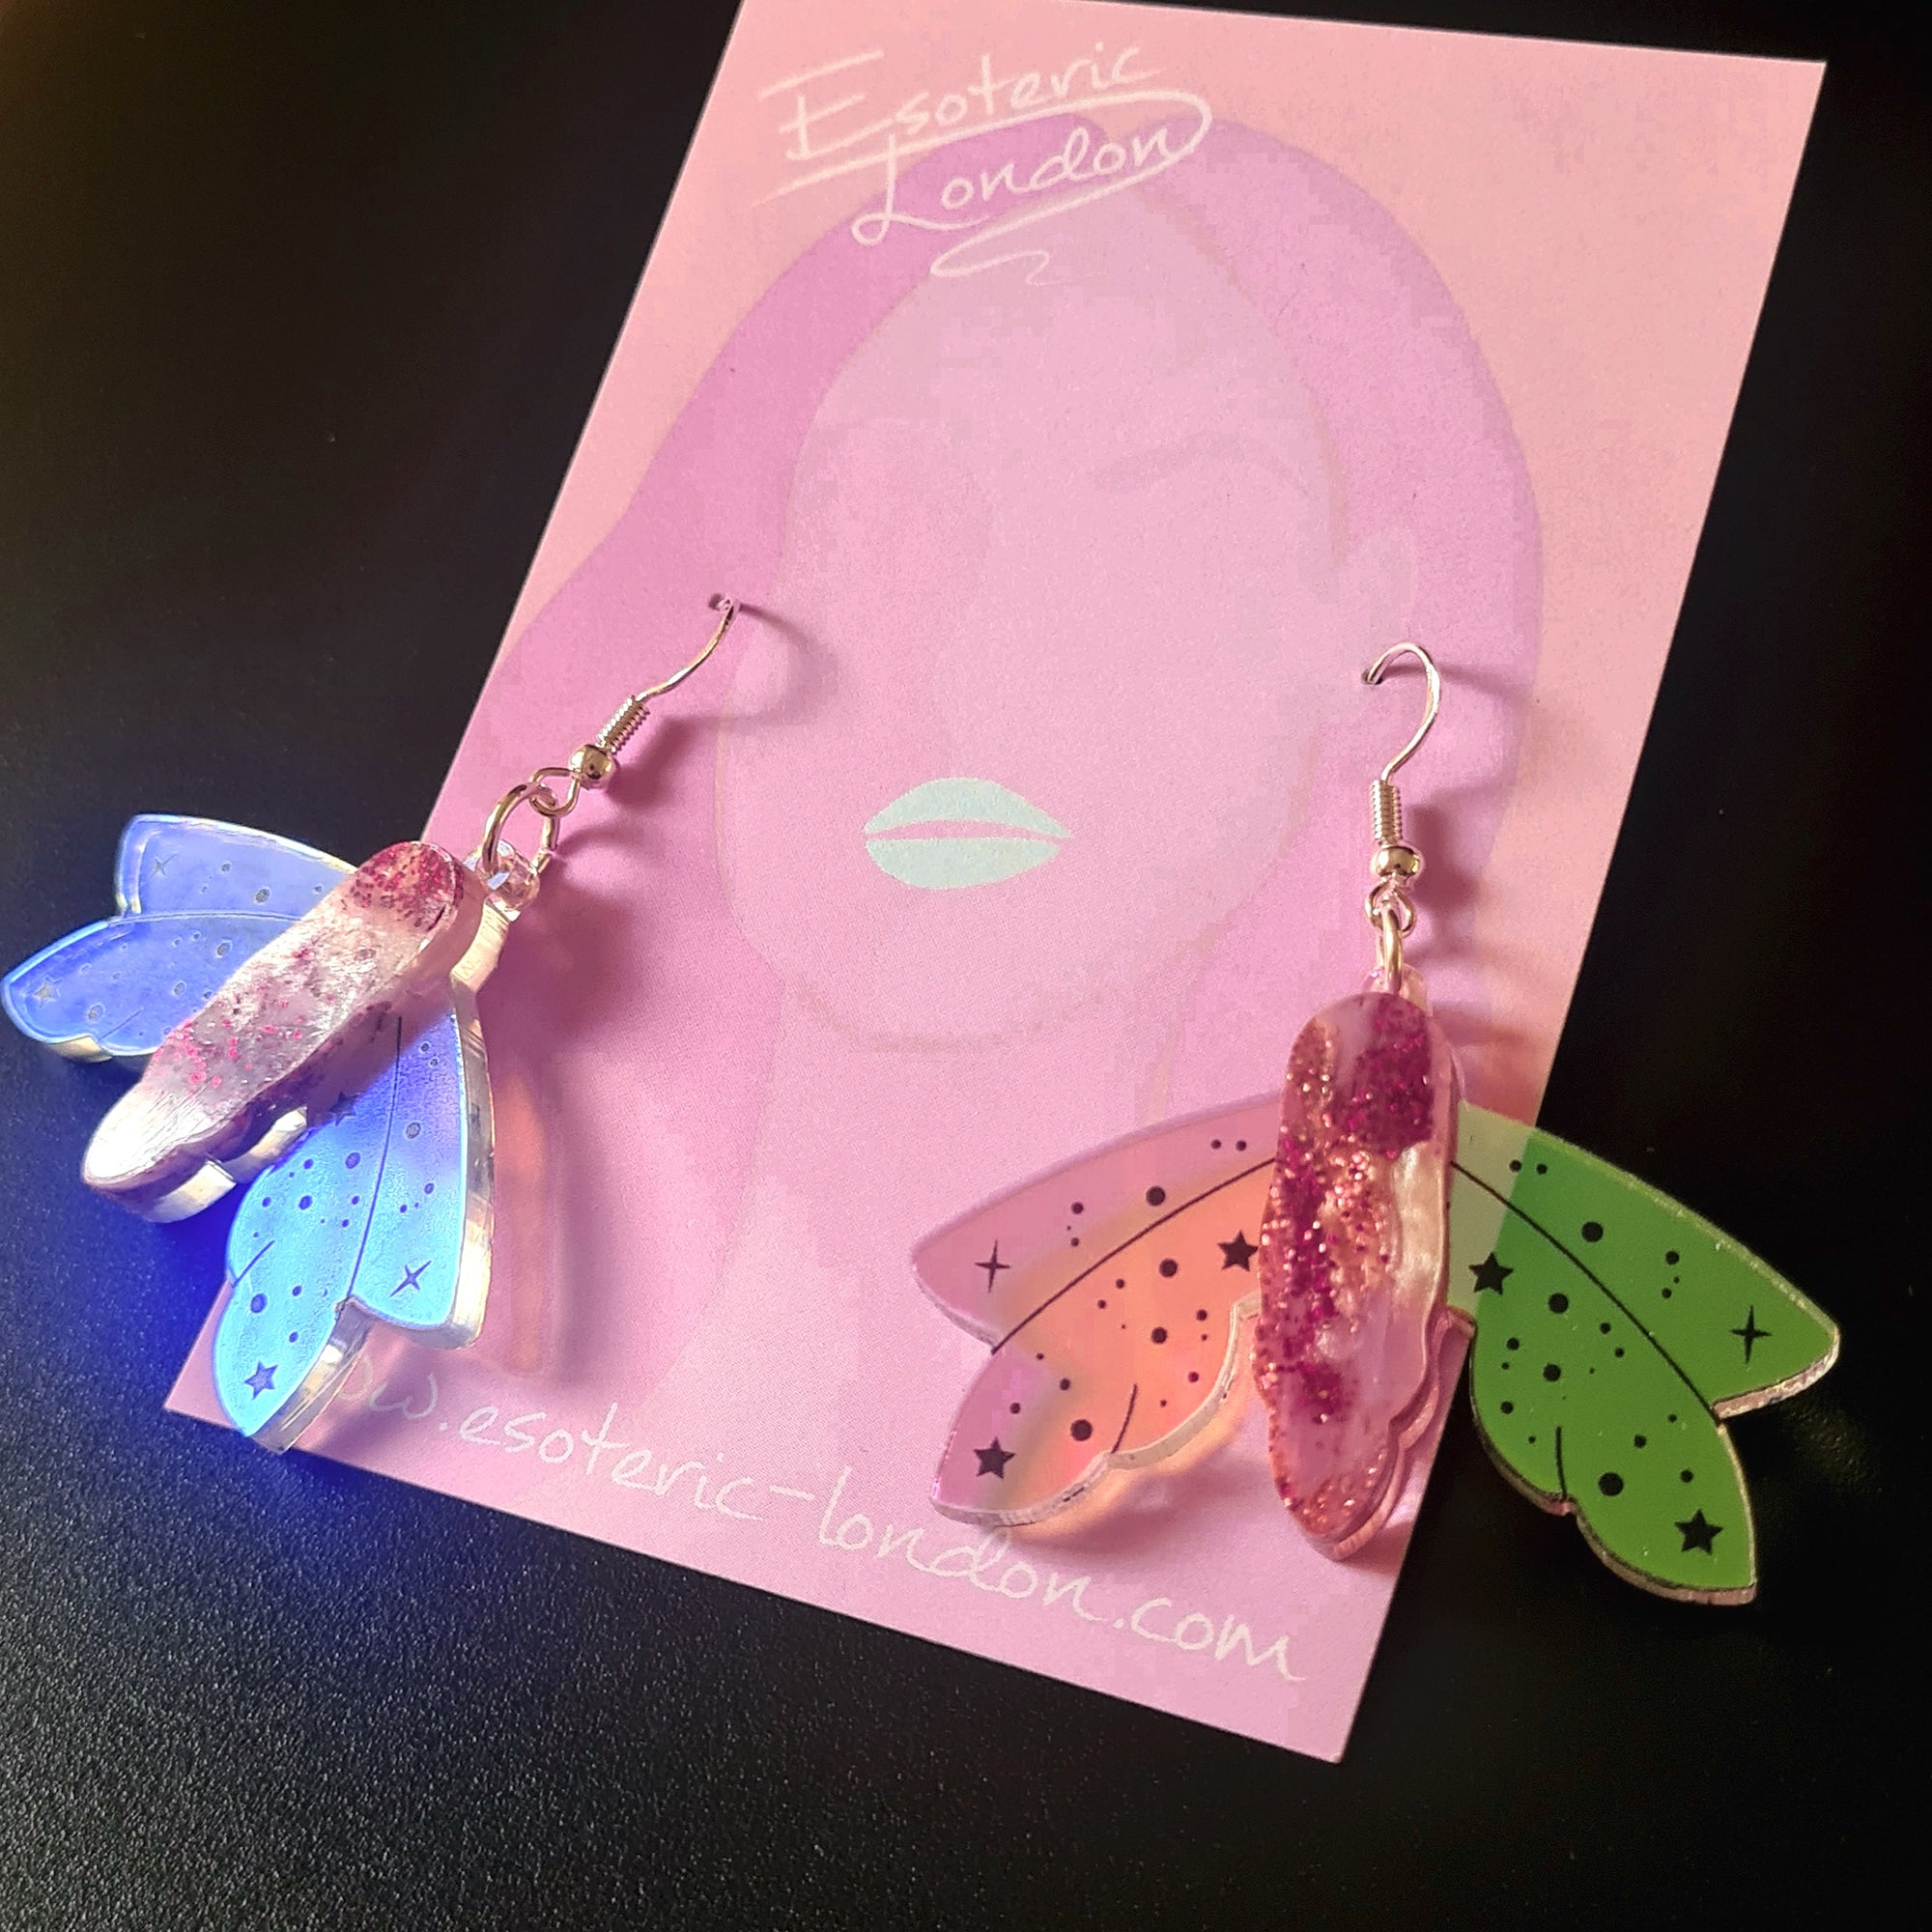 Recycled Acrylic Celestial Moth Earrings by Esoteric London (Pink/Red)